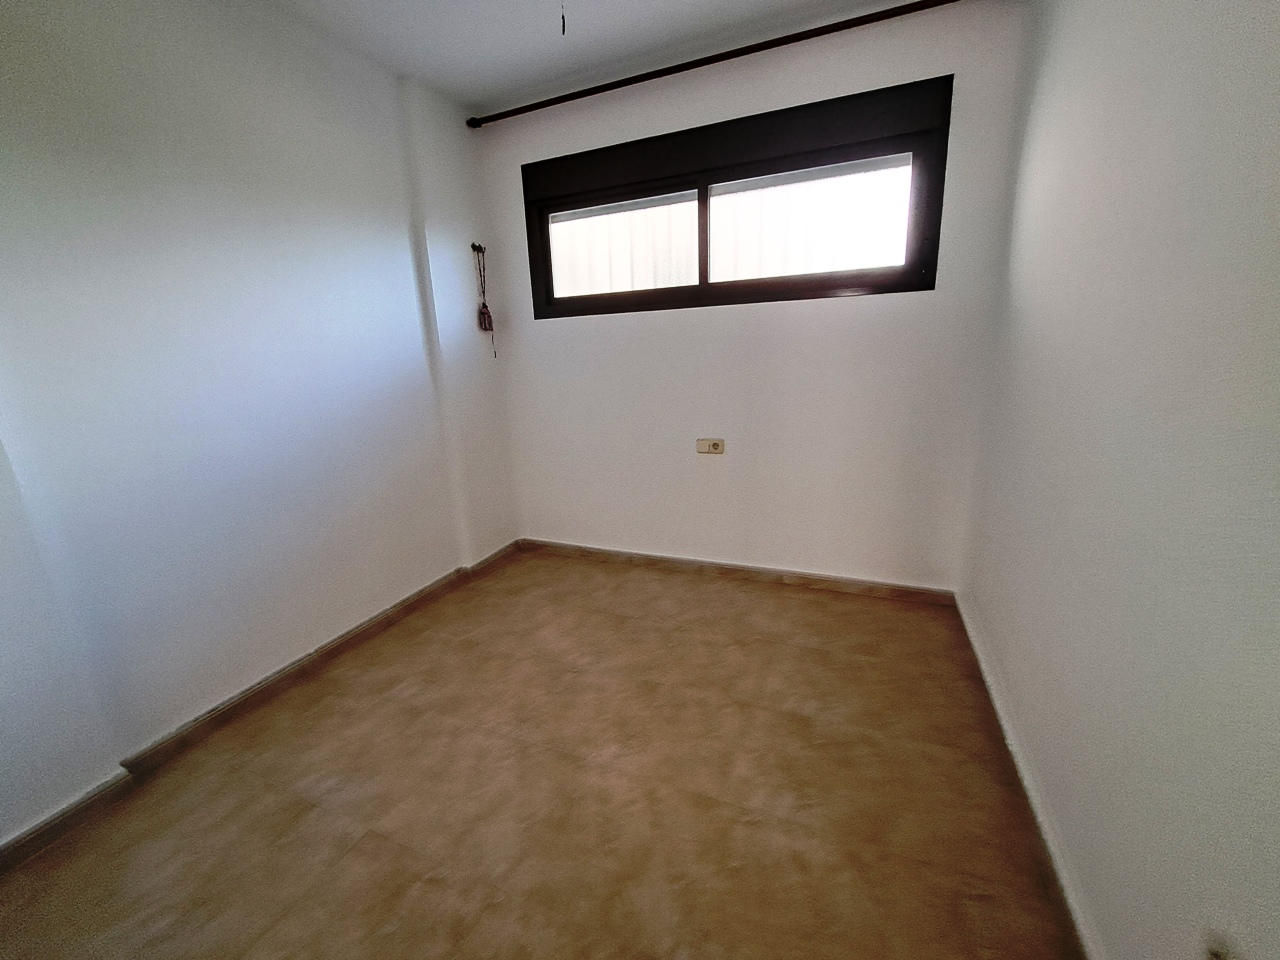 Nice groundfloor apartment with terrace and garden